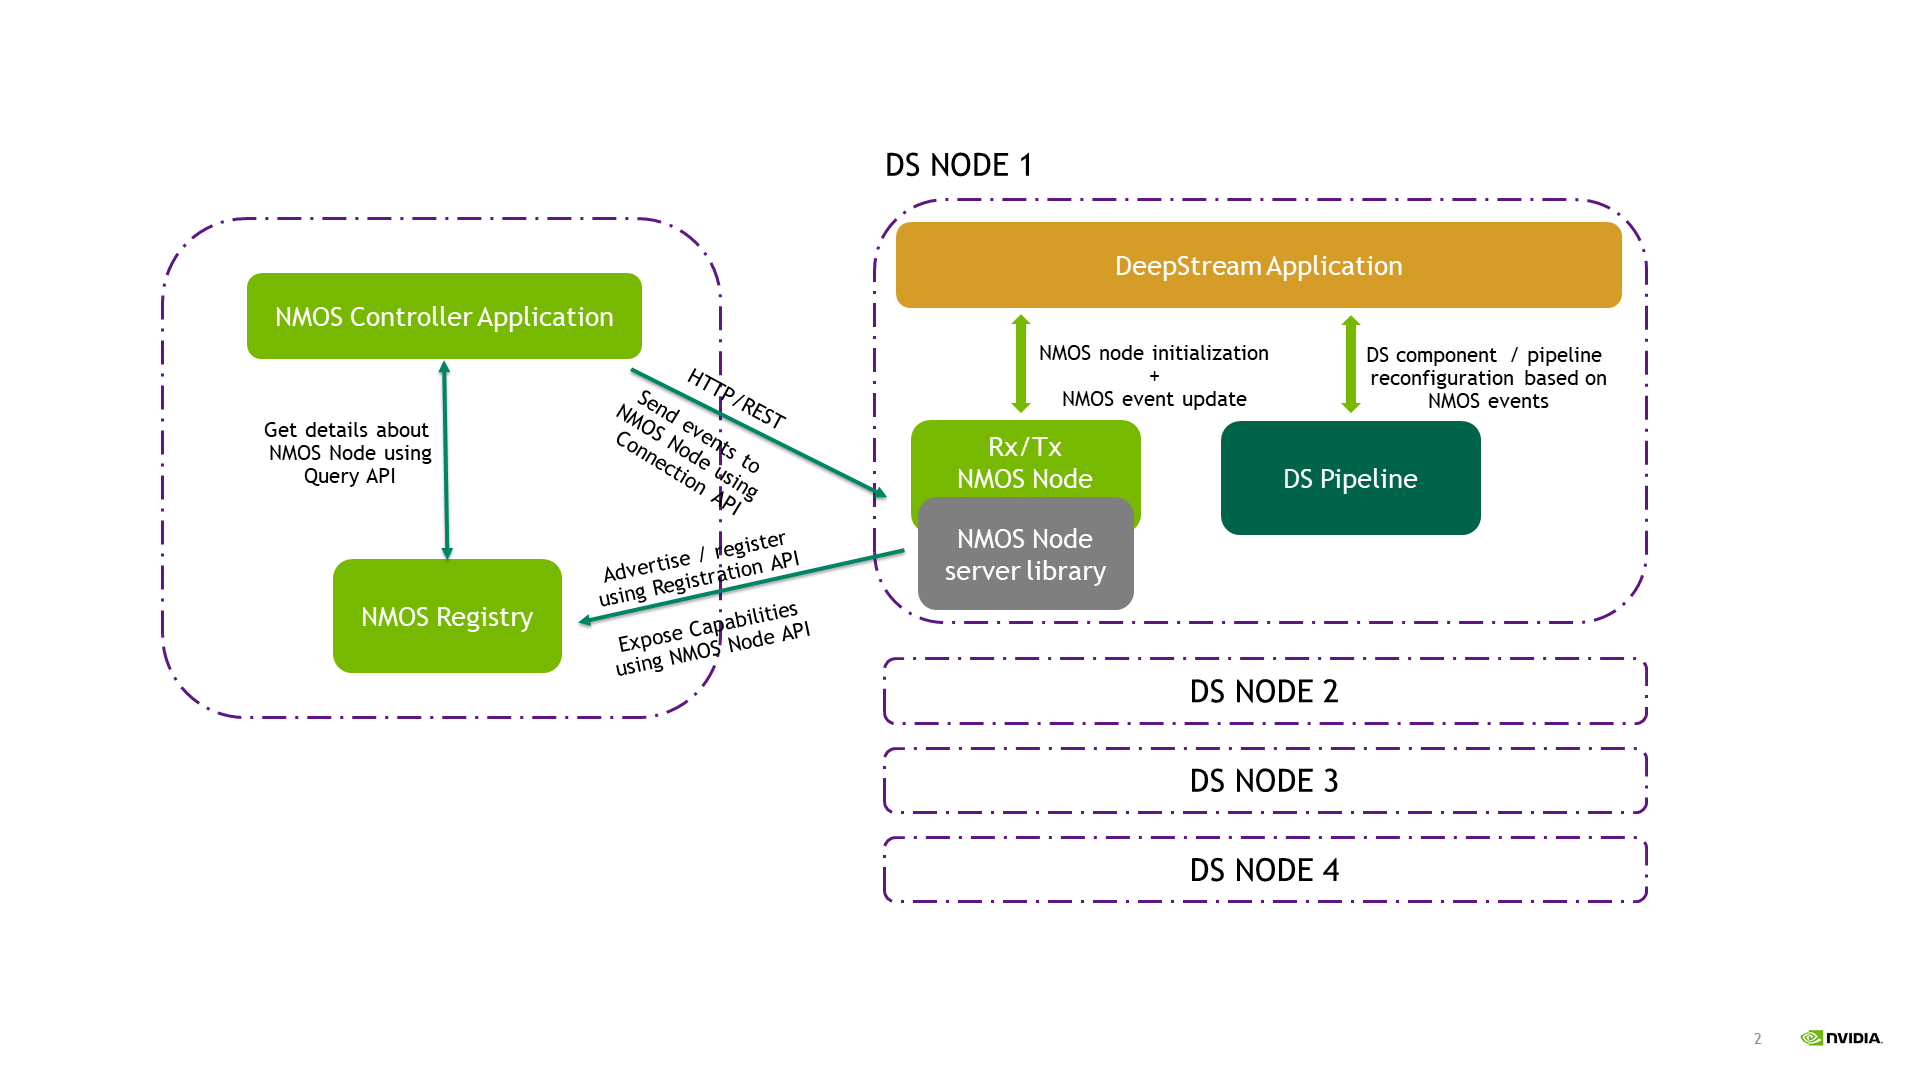 DeepStream NMOS Reference Application Architecture